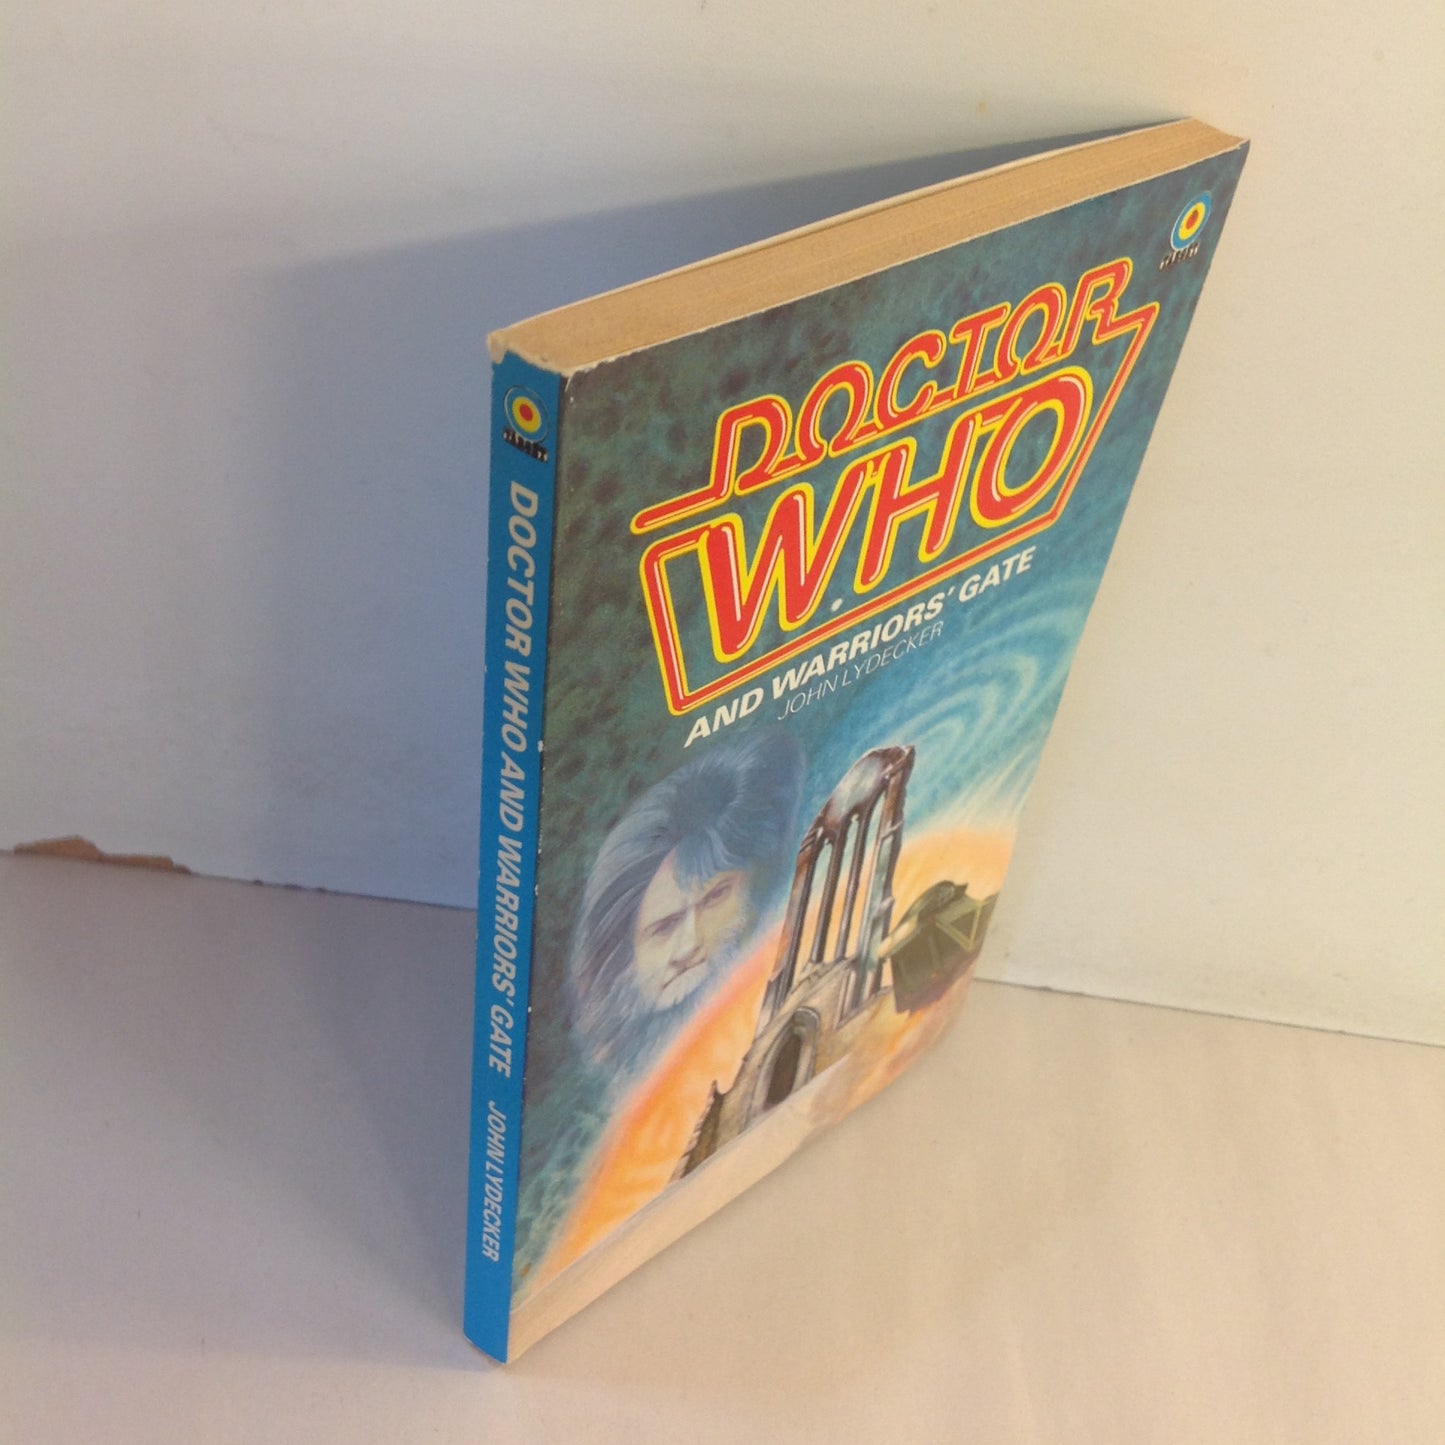 Vintage 1983 Mass Market Paperback Doctor Who and Warriors' Gate John Lydecker